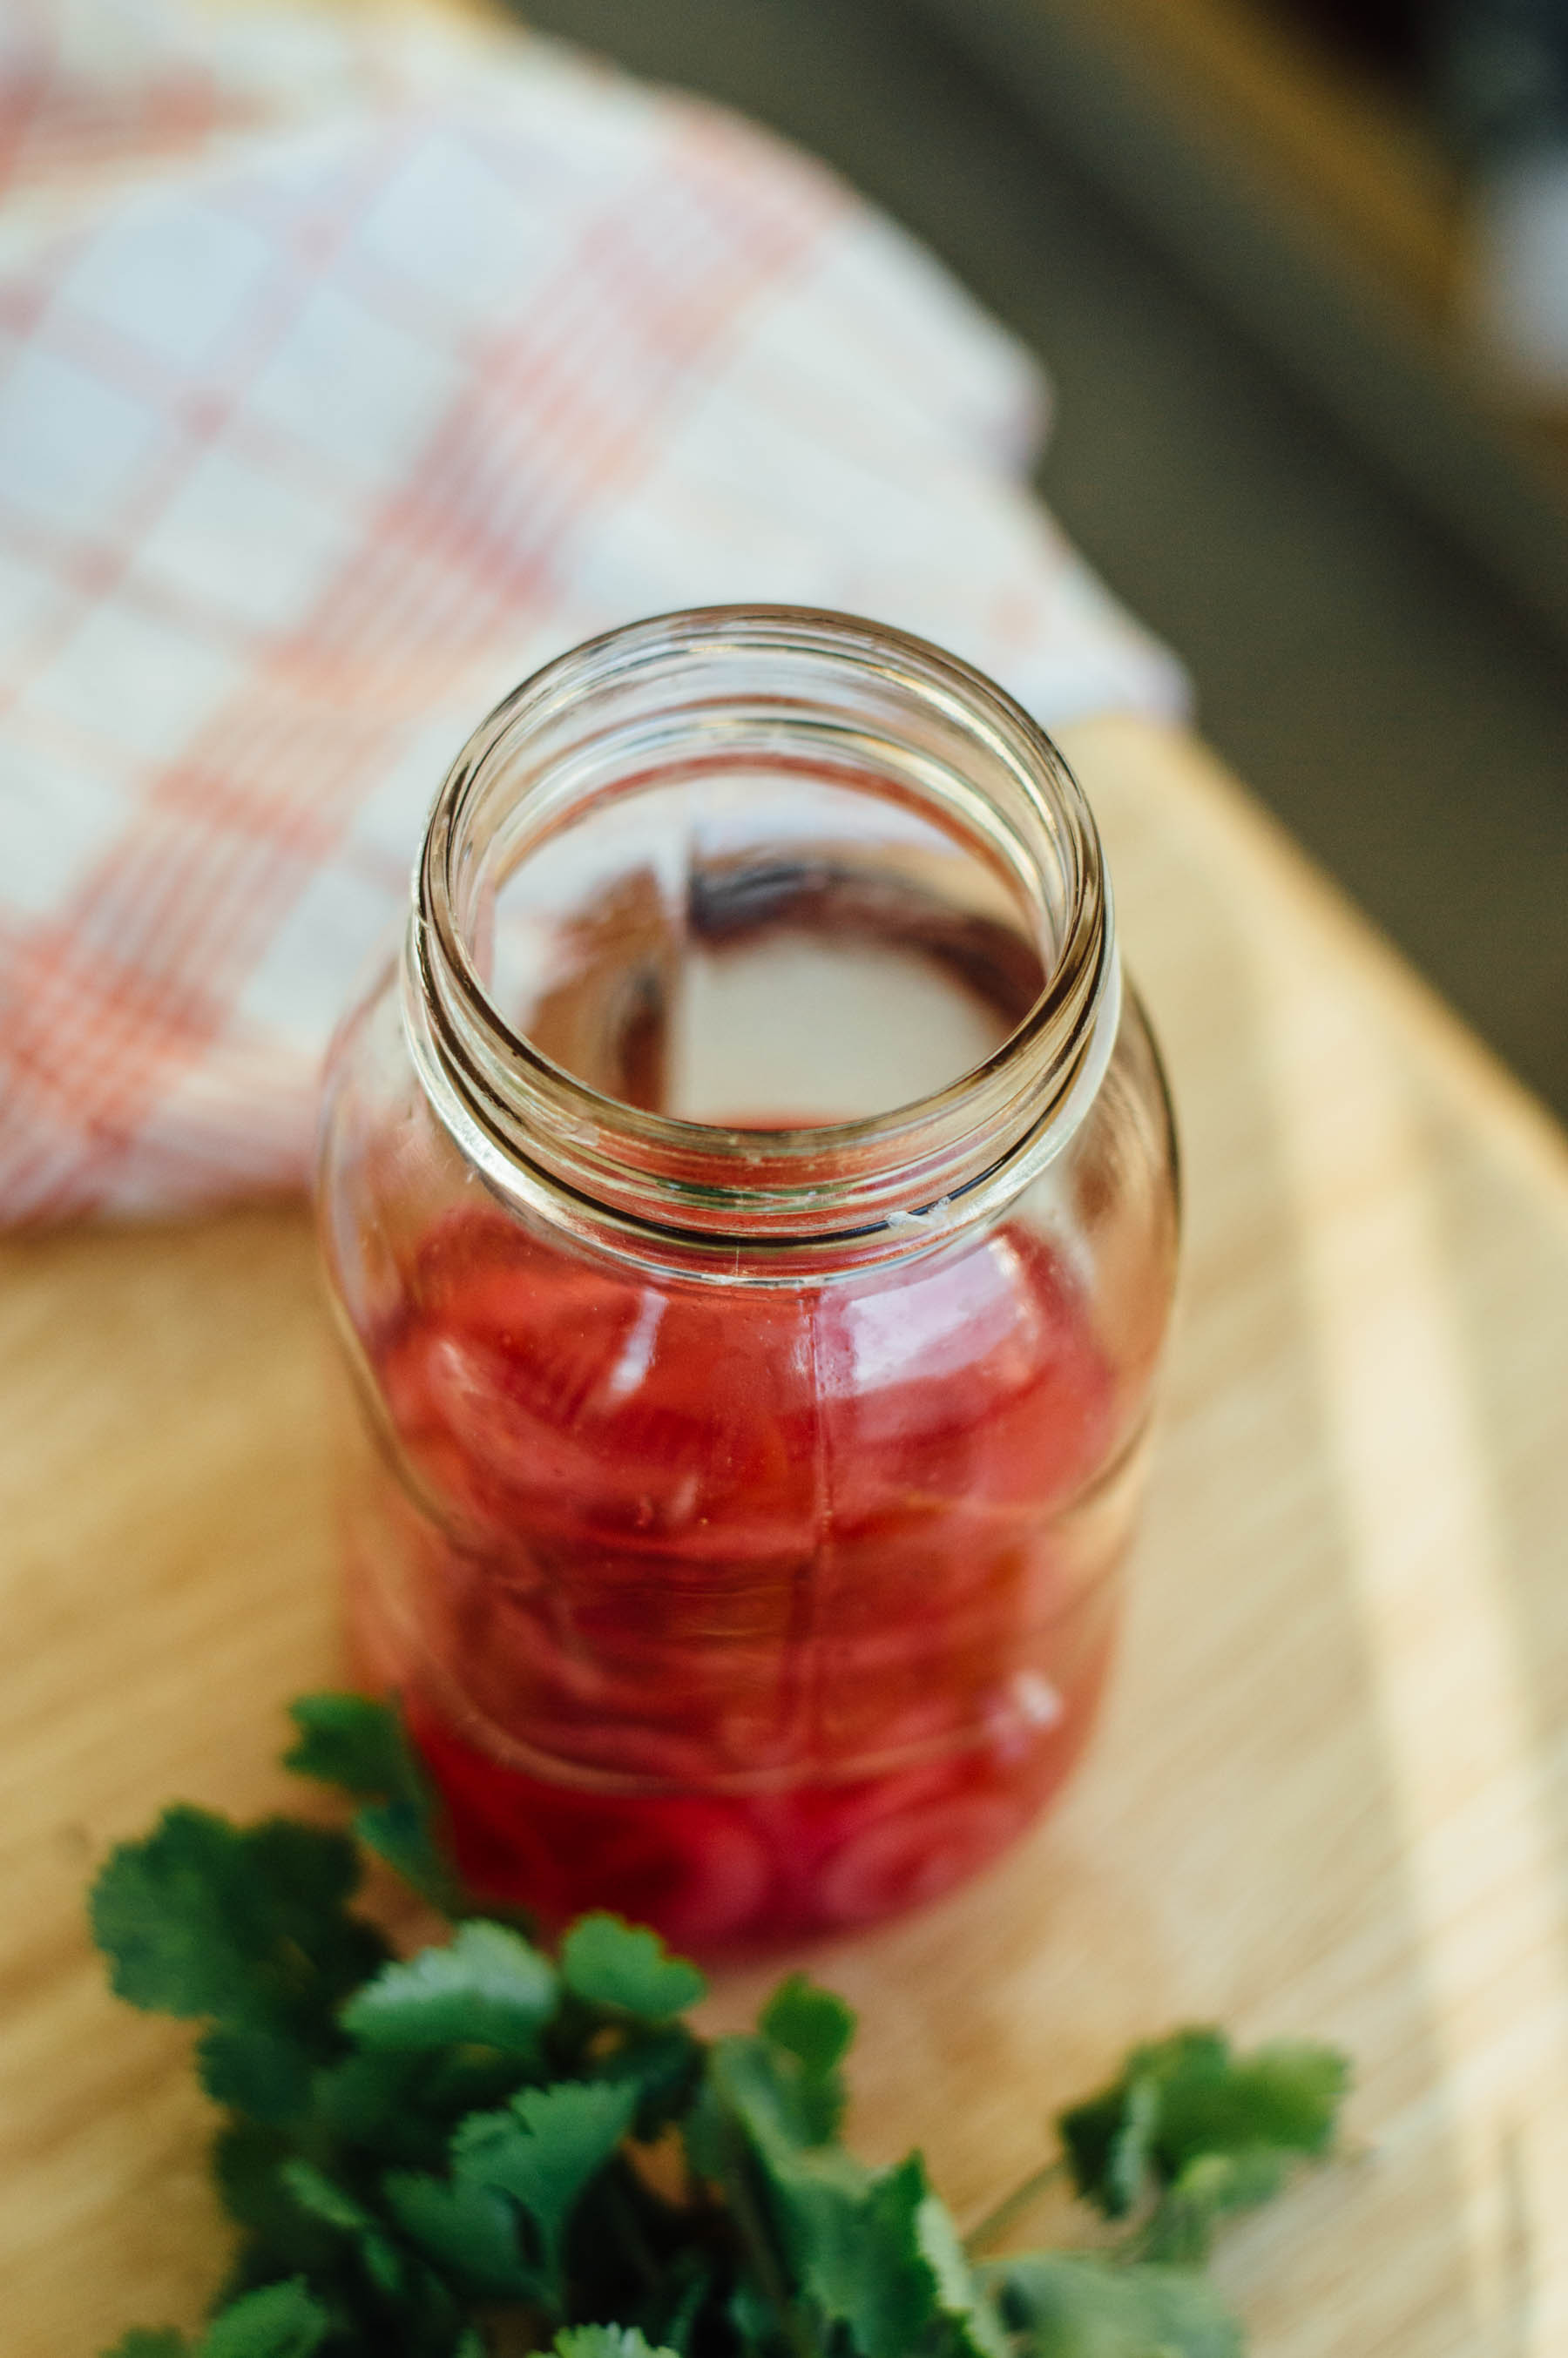 Ever try pickled red onions? Whip up your own batch at home with 4 ingredients | bygabriella.co